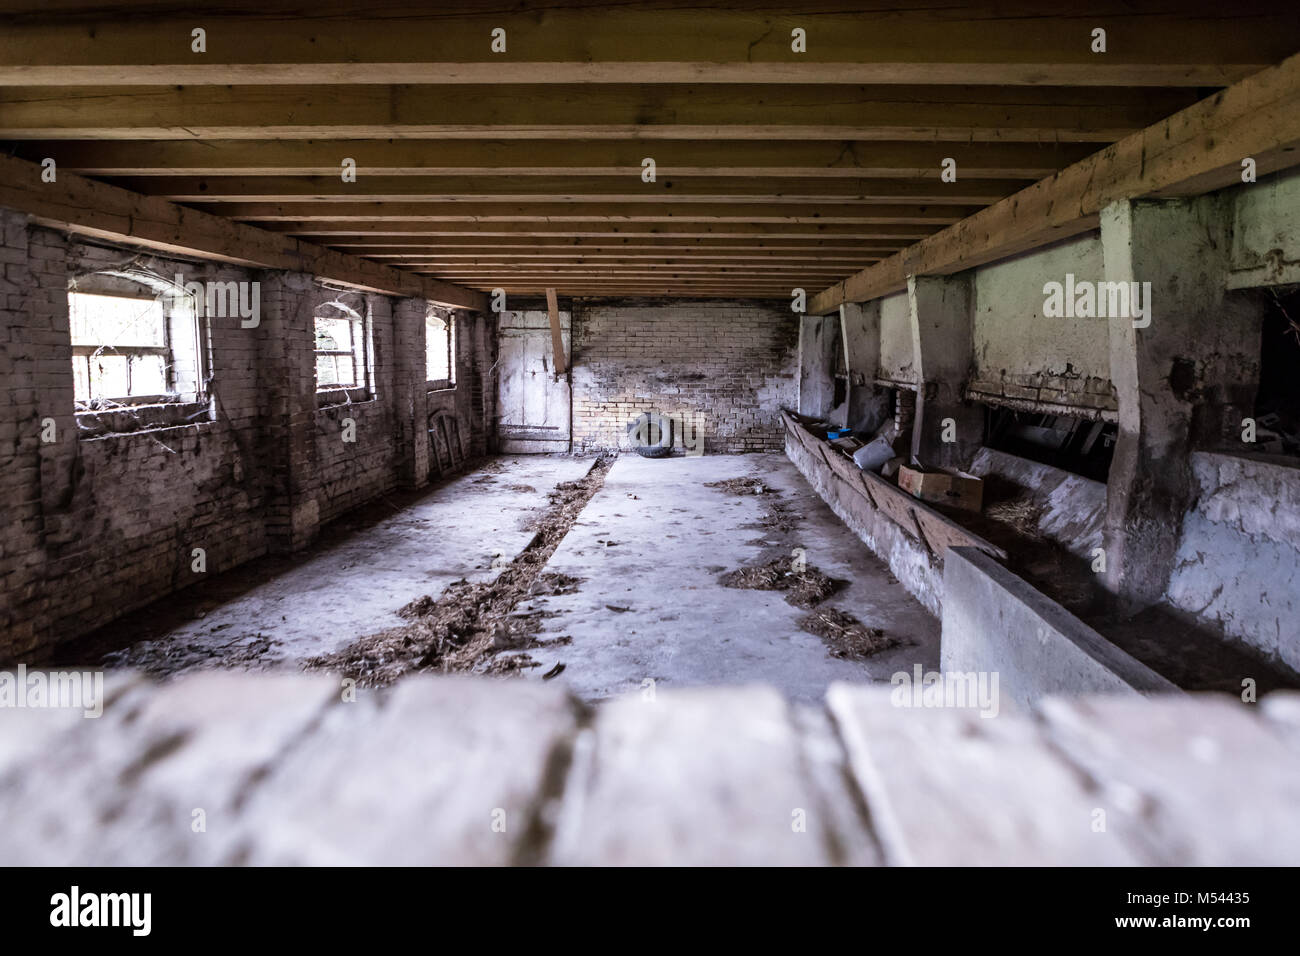 Empty cattle shed - Lost Place Stock Photo